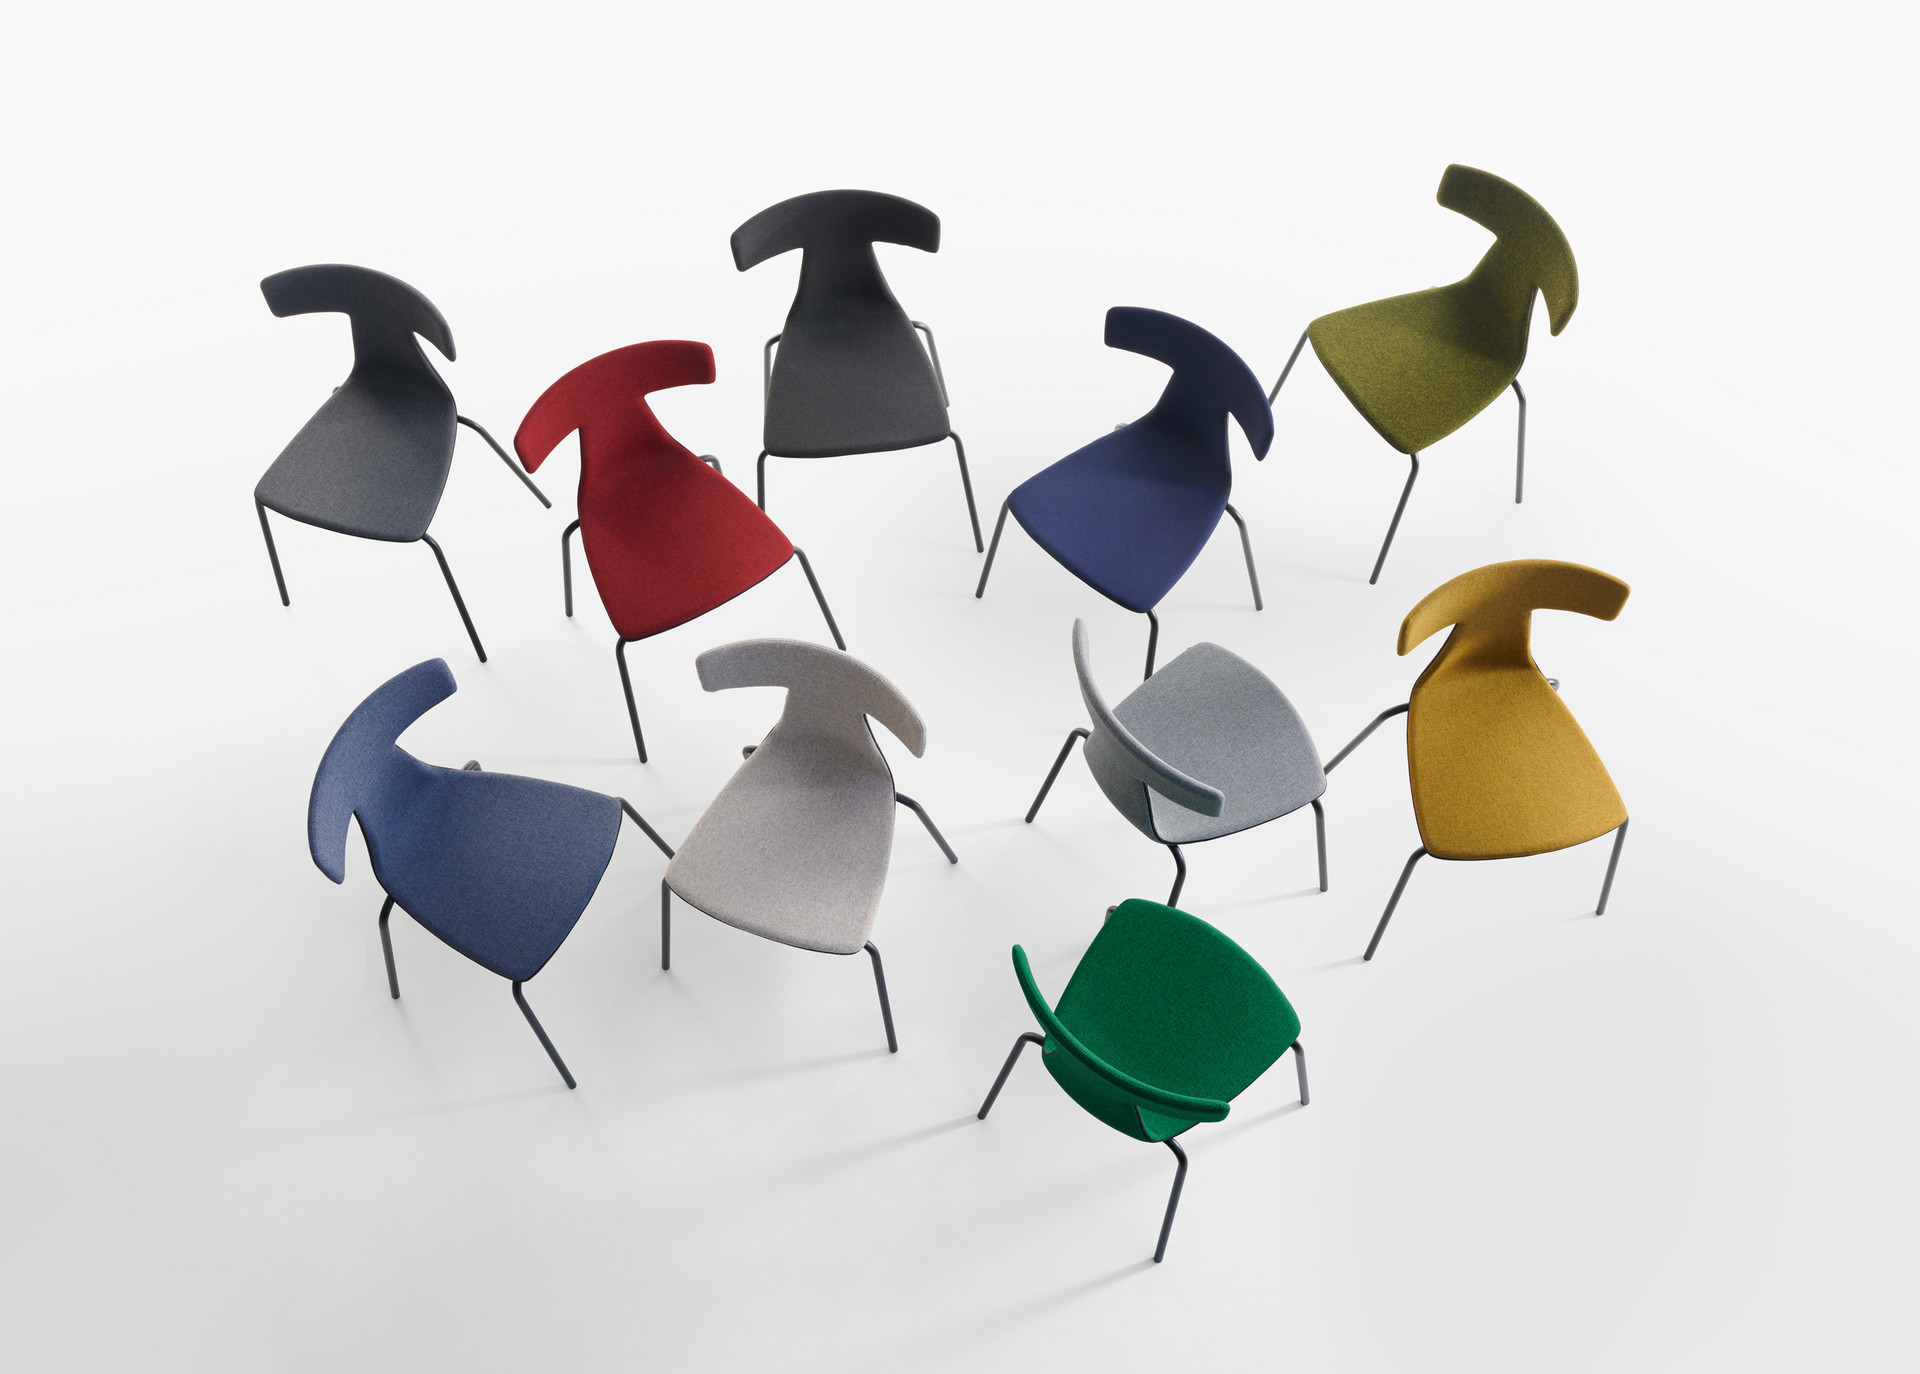 Remo, upholstered, indoor, living, fabric, leather, stackable chair, konstantin grcic, plank